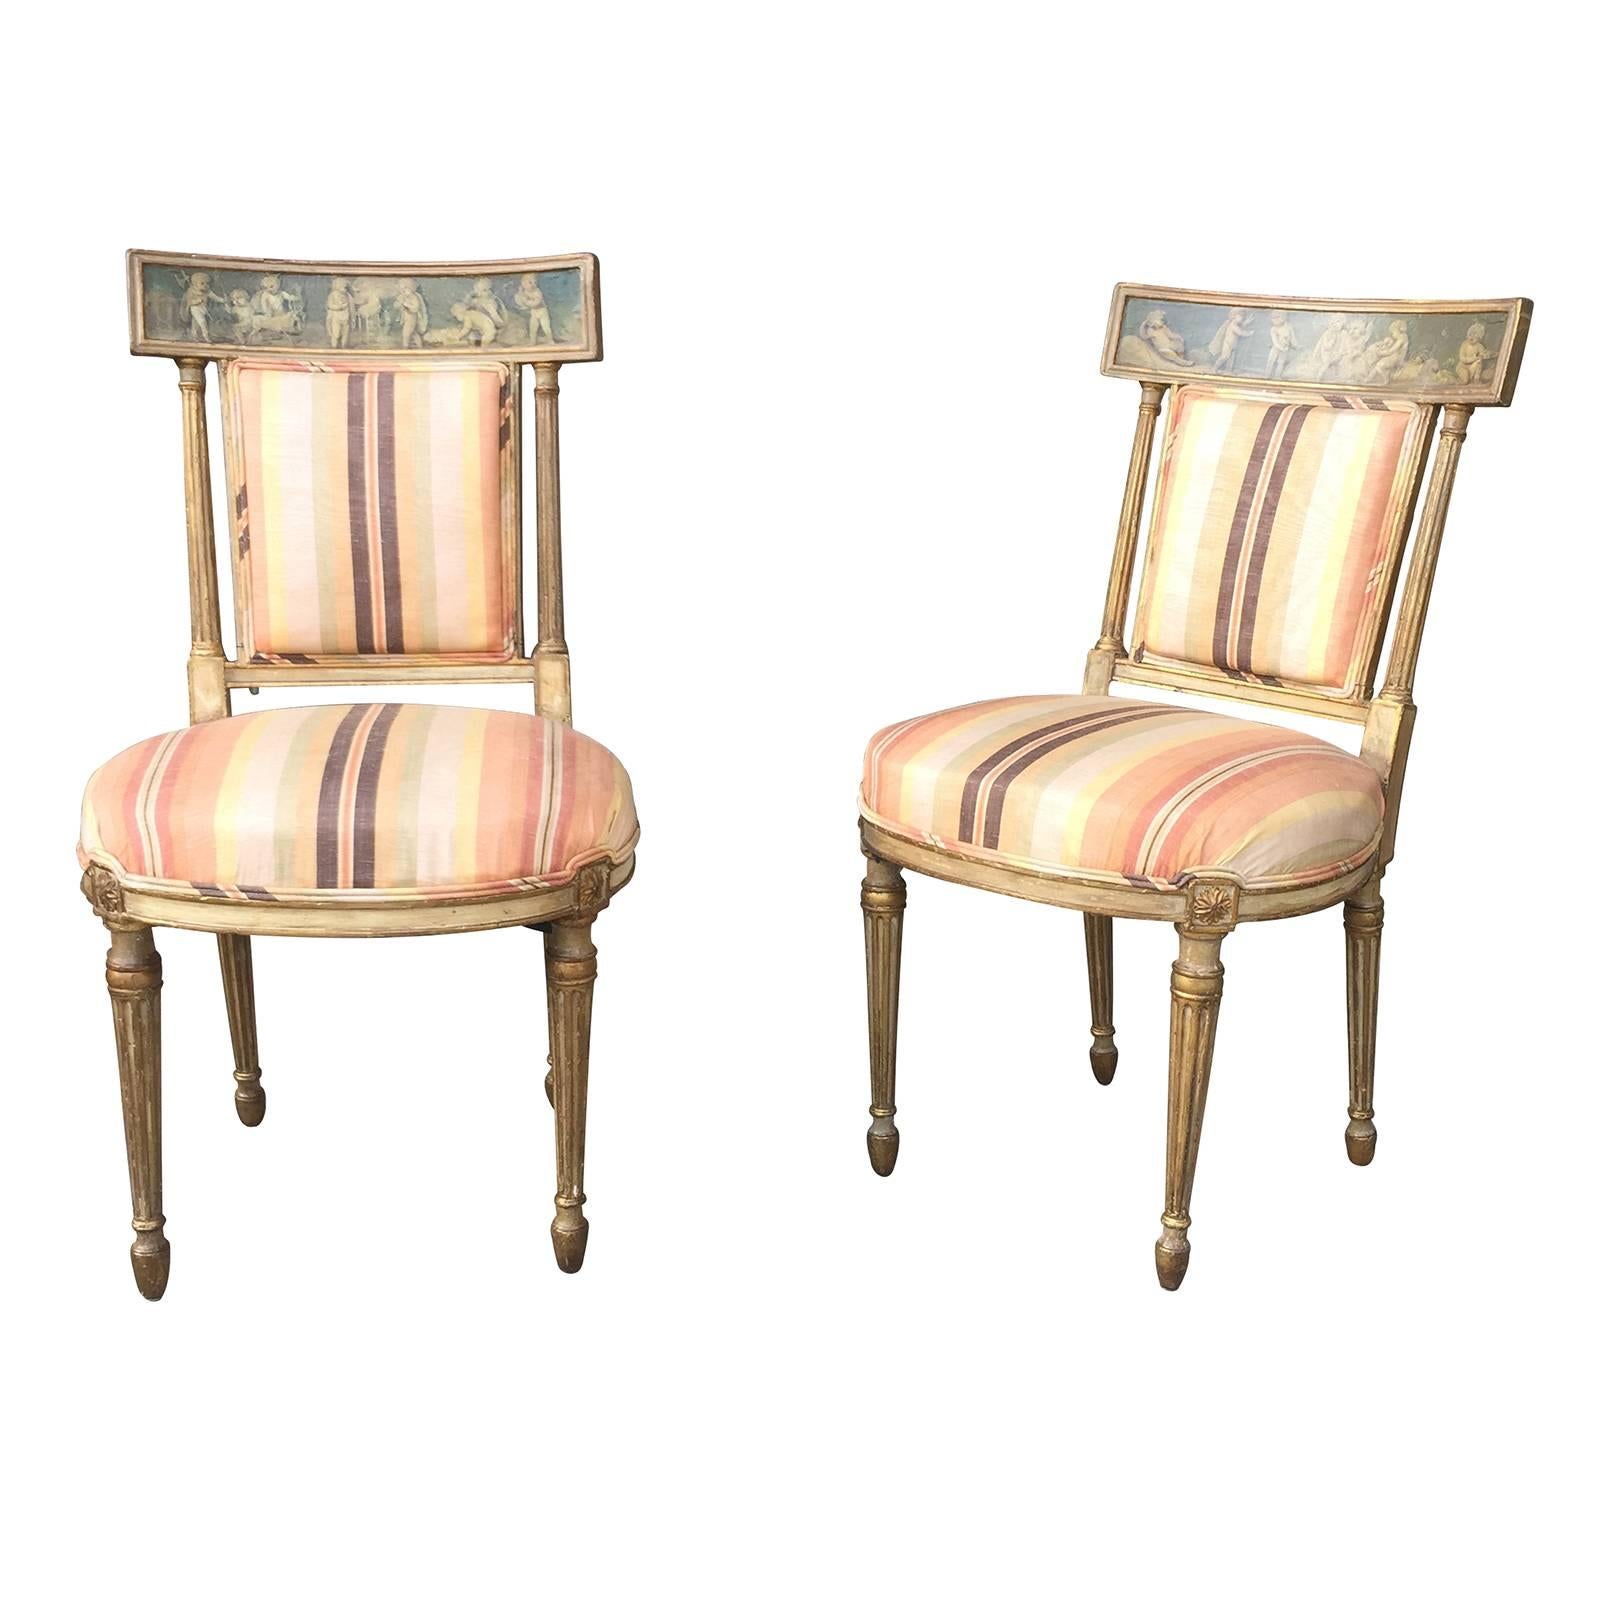 Pair of 19th Century English Neoclassical Side Chairs